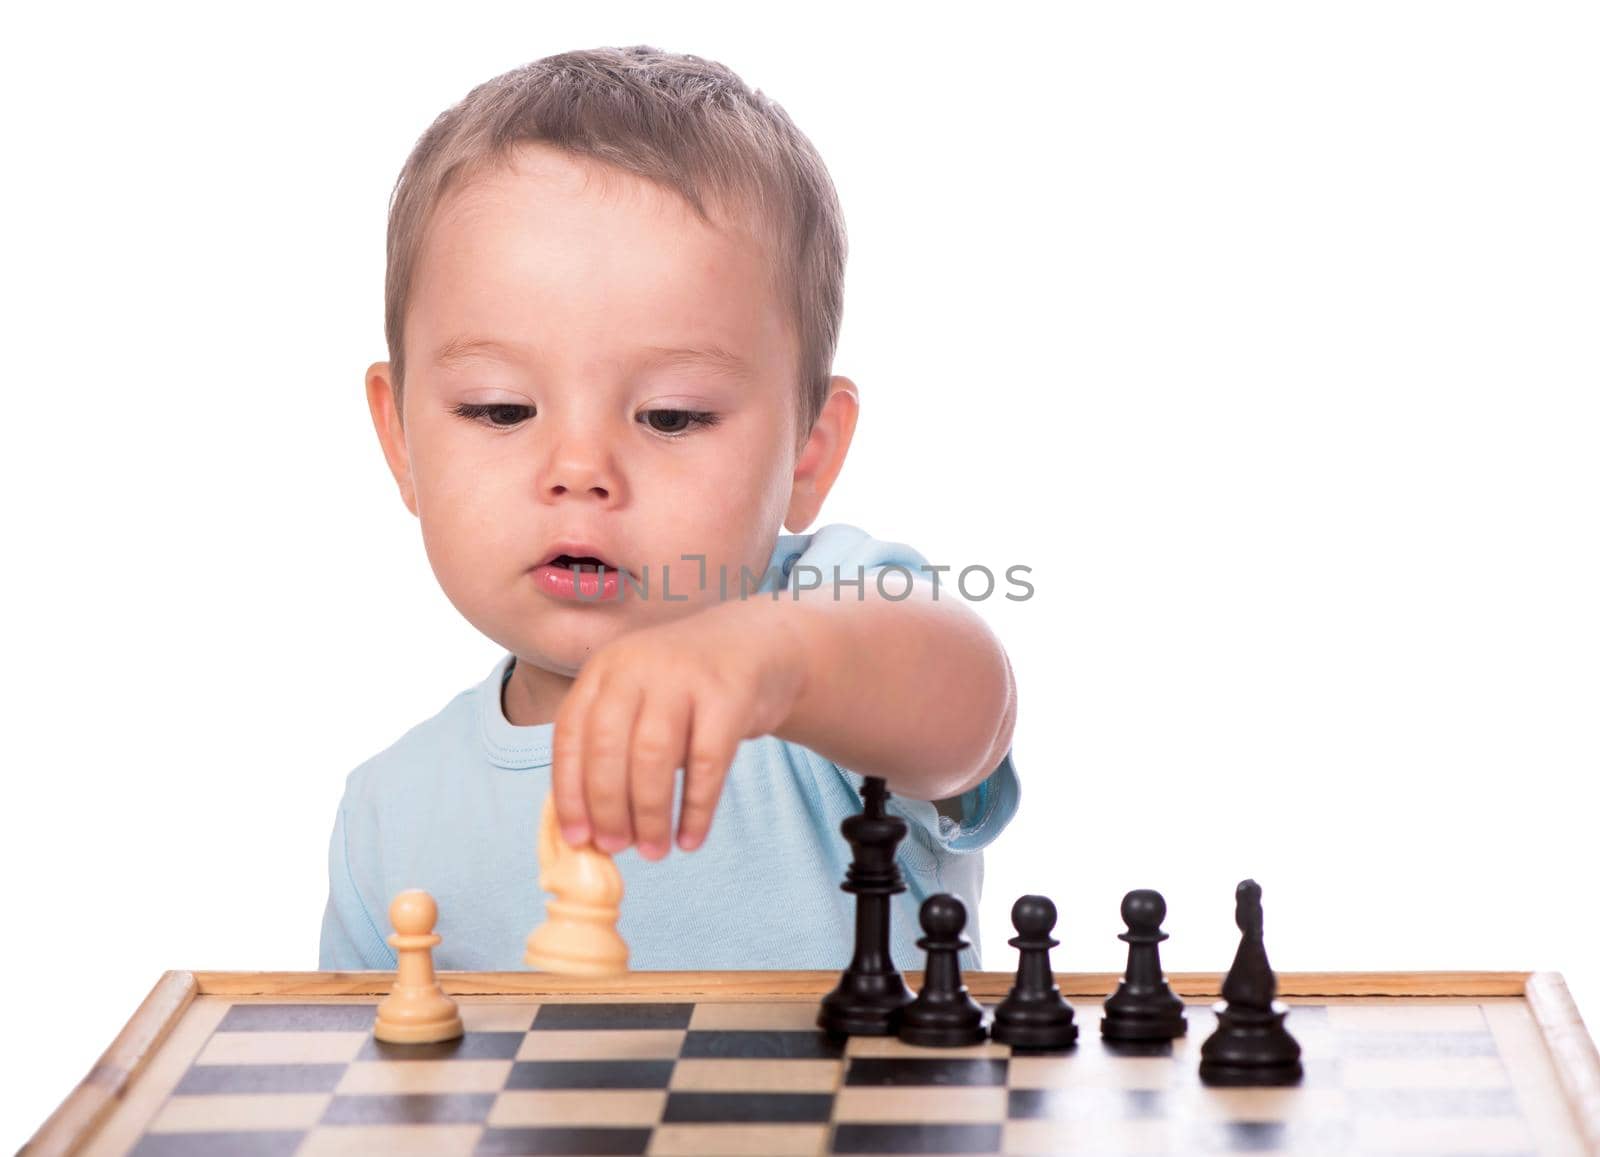 little boy staring at the chess pieces isolated on white background by aprilphoto